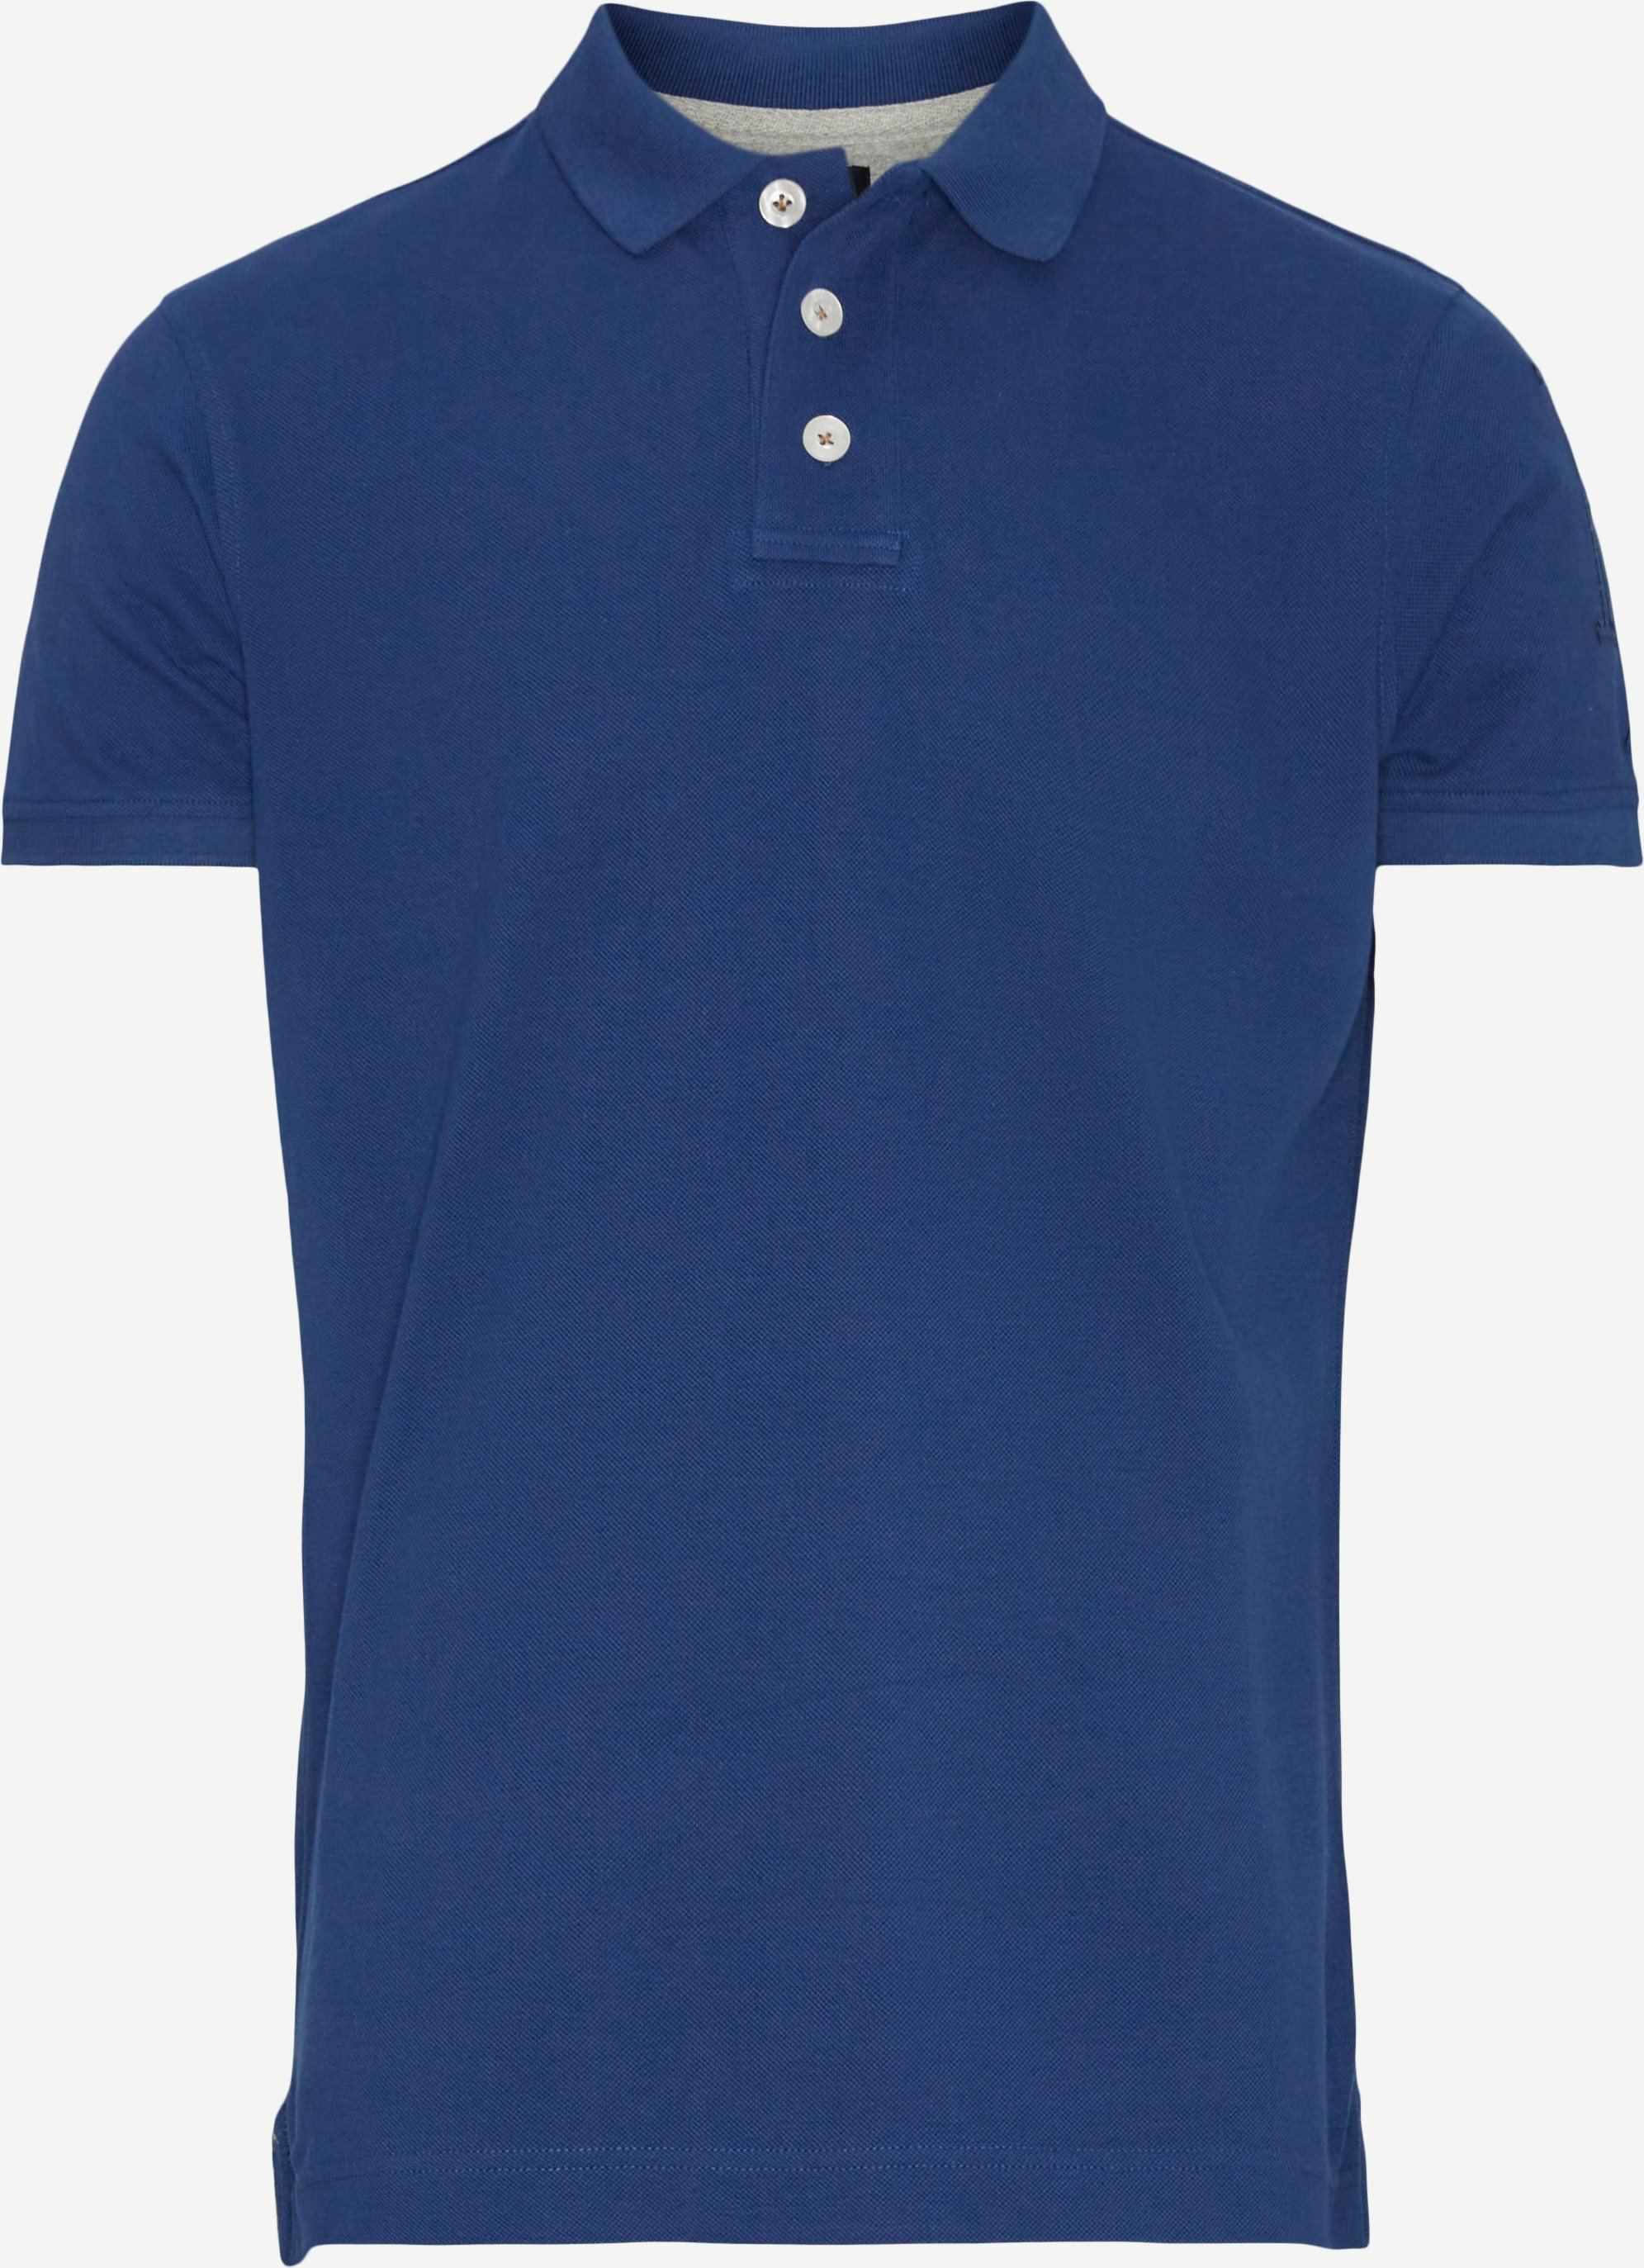 Rough Style Polo - T-shirts - Regular fit - Blå